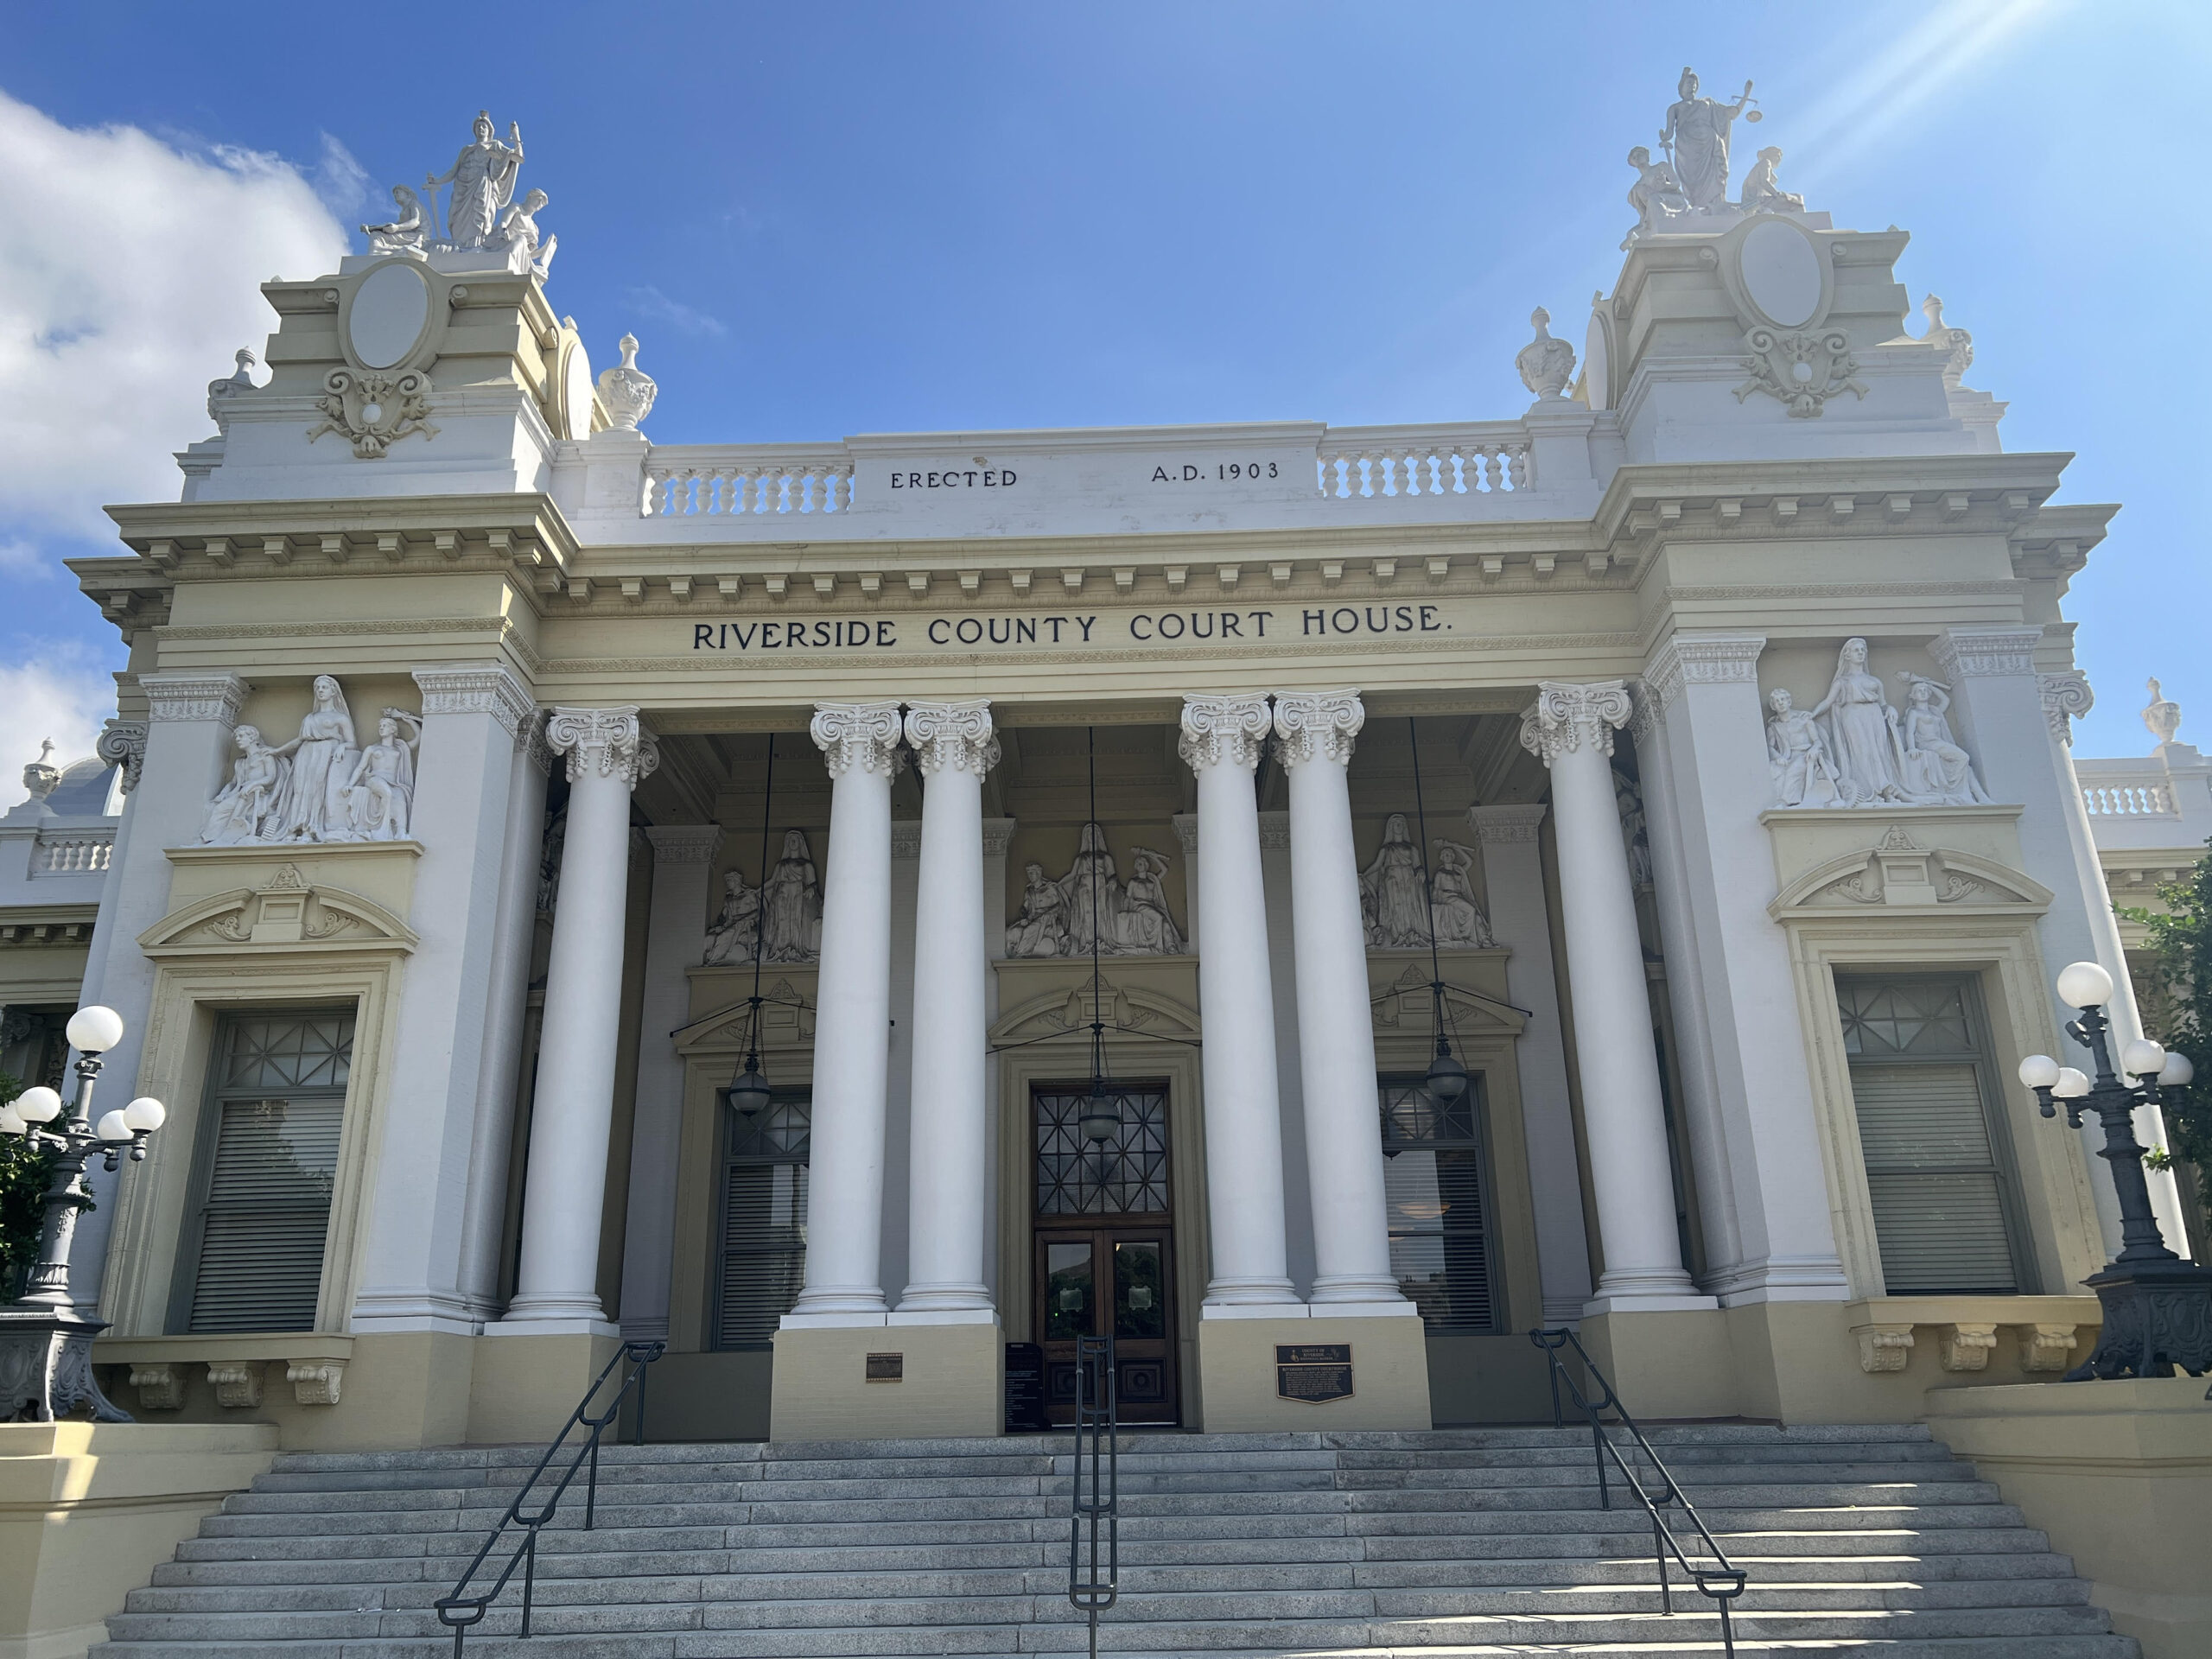 The Superior Court of Riverside County